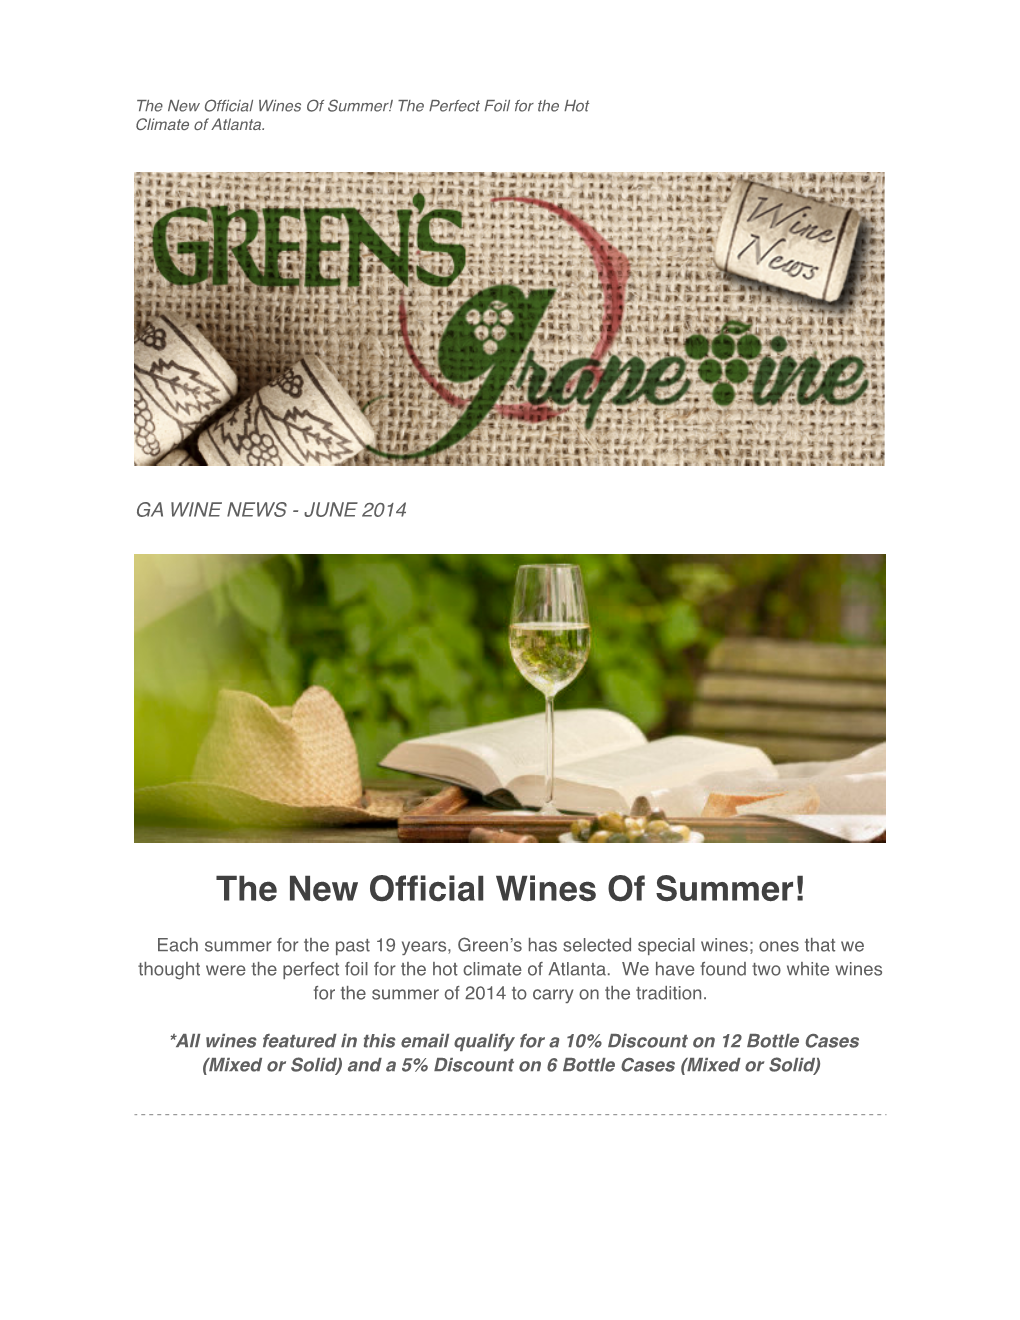 Green's Official Wines of Summer for 2014